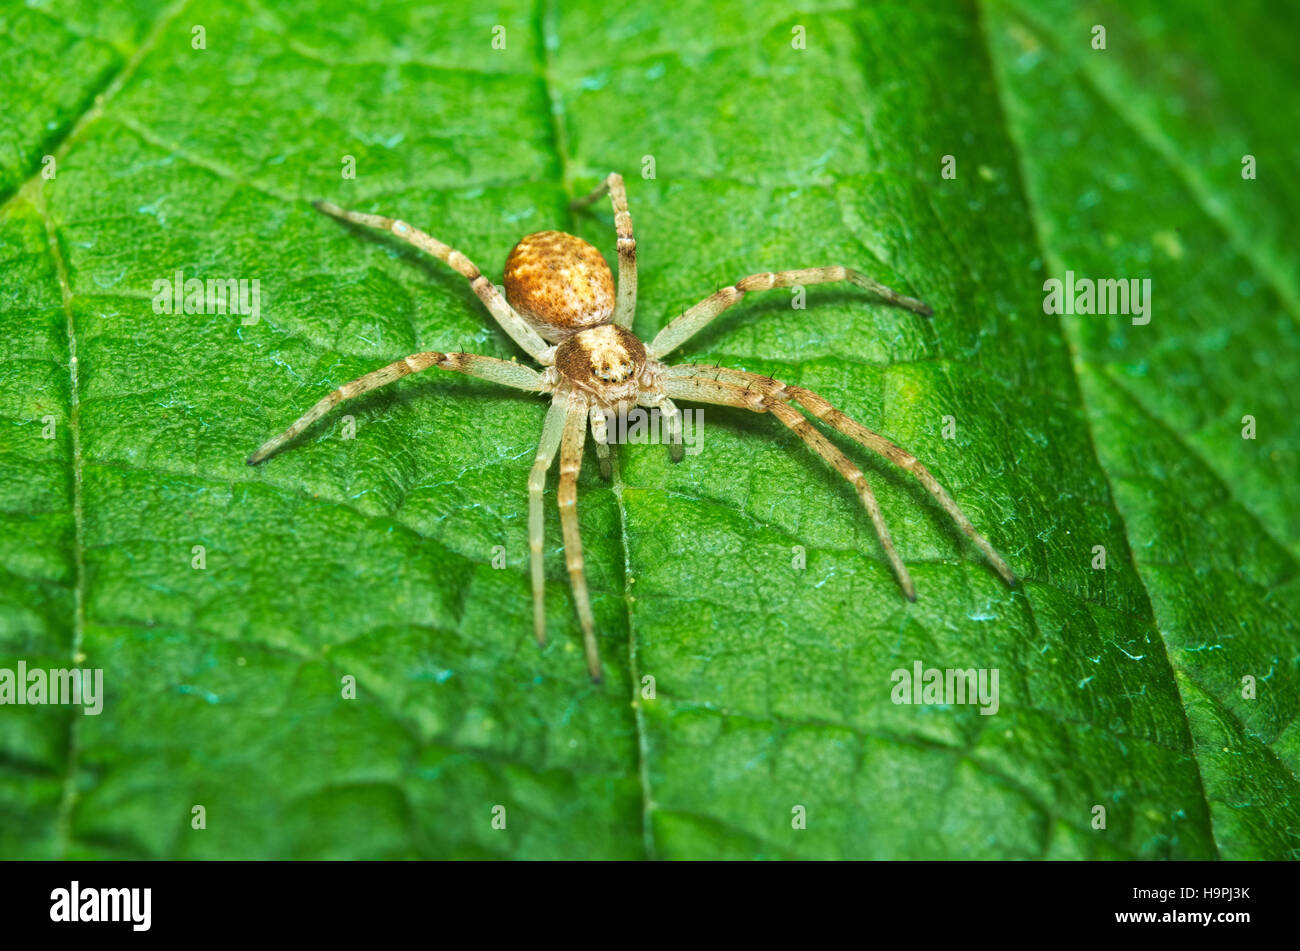 Spider hunting on a leaf Stock Photo